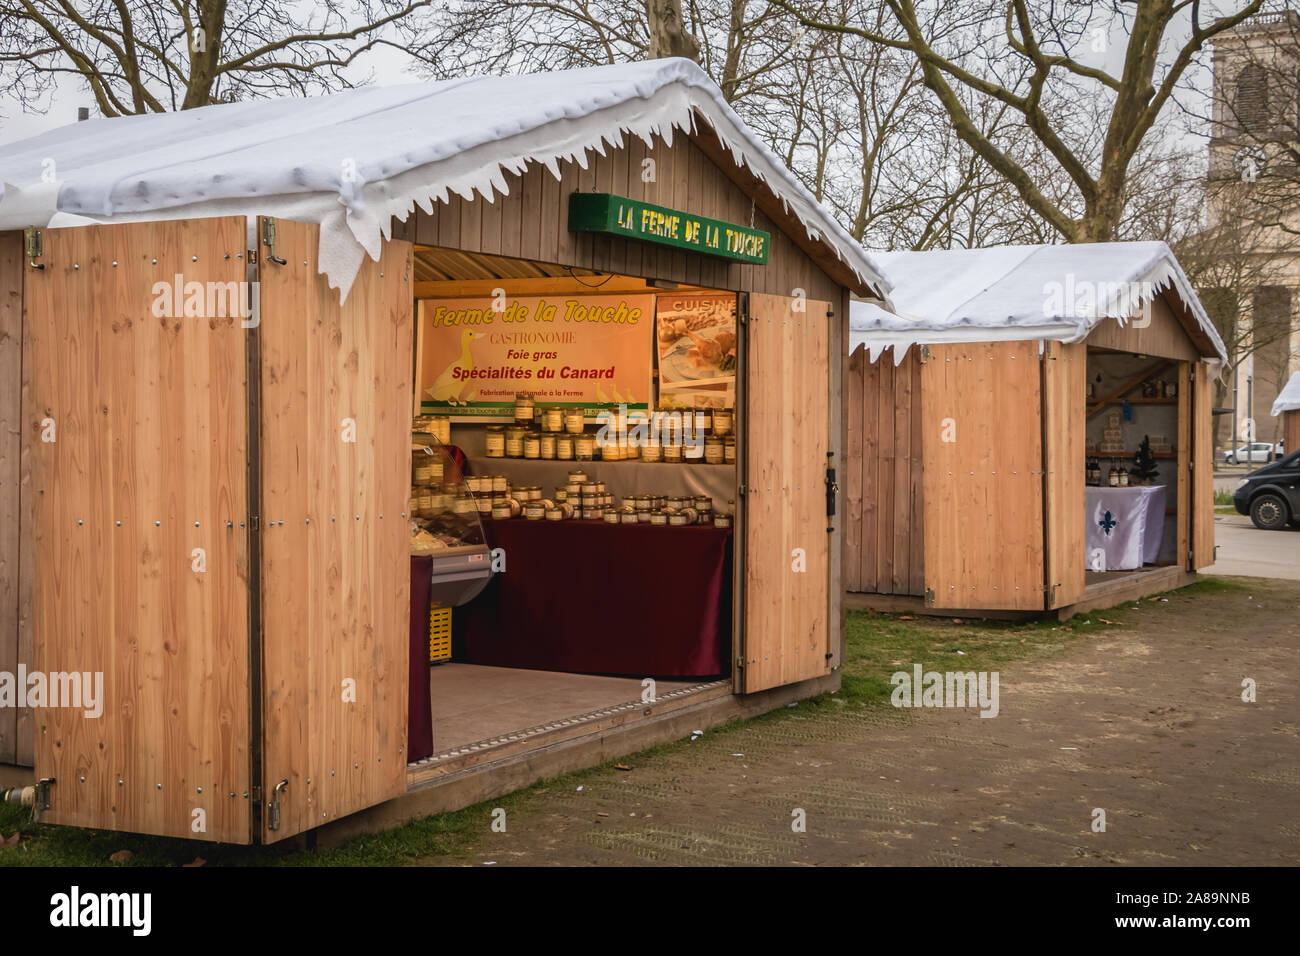 La Roche sur Yon, France - December 19, 2016: view of a small Christmas walkway cottage in the city center on a winter day Stock Photo